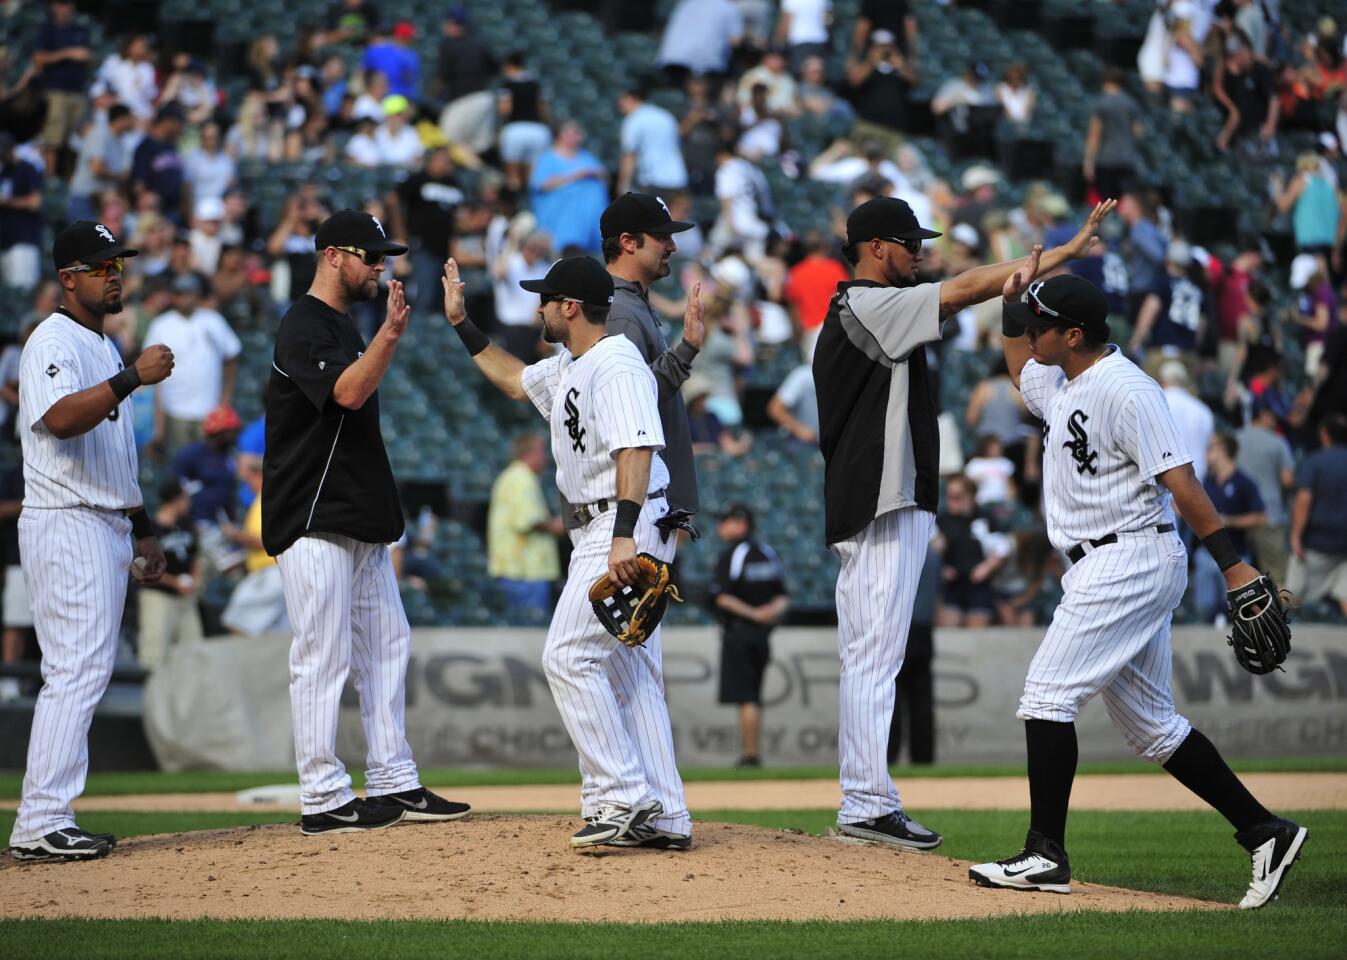 The White Sox celebrate their win against the Tigers on Sunday.